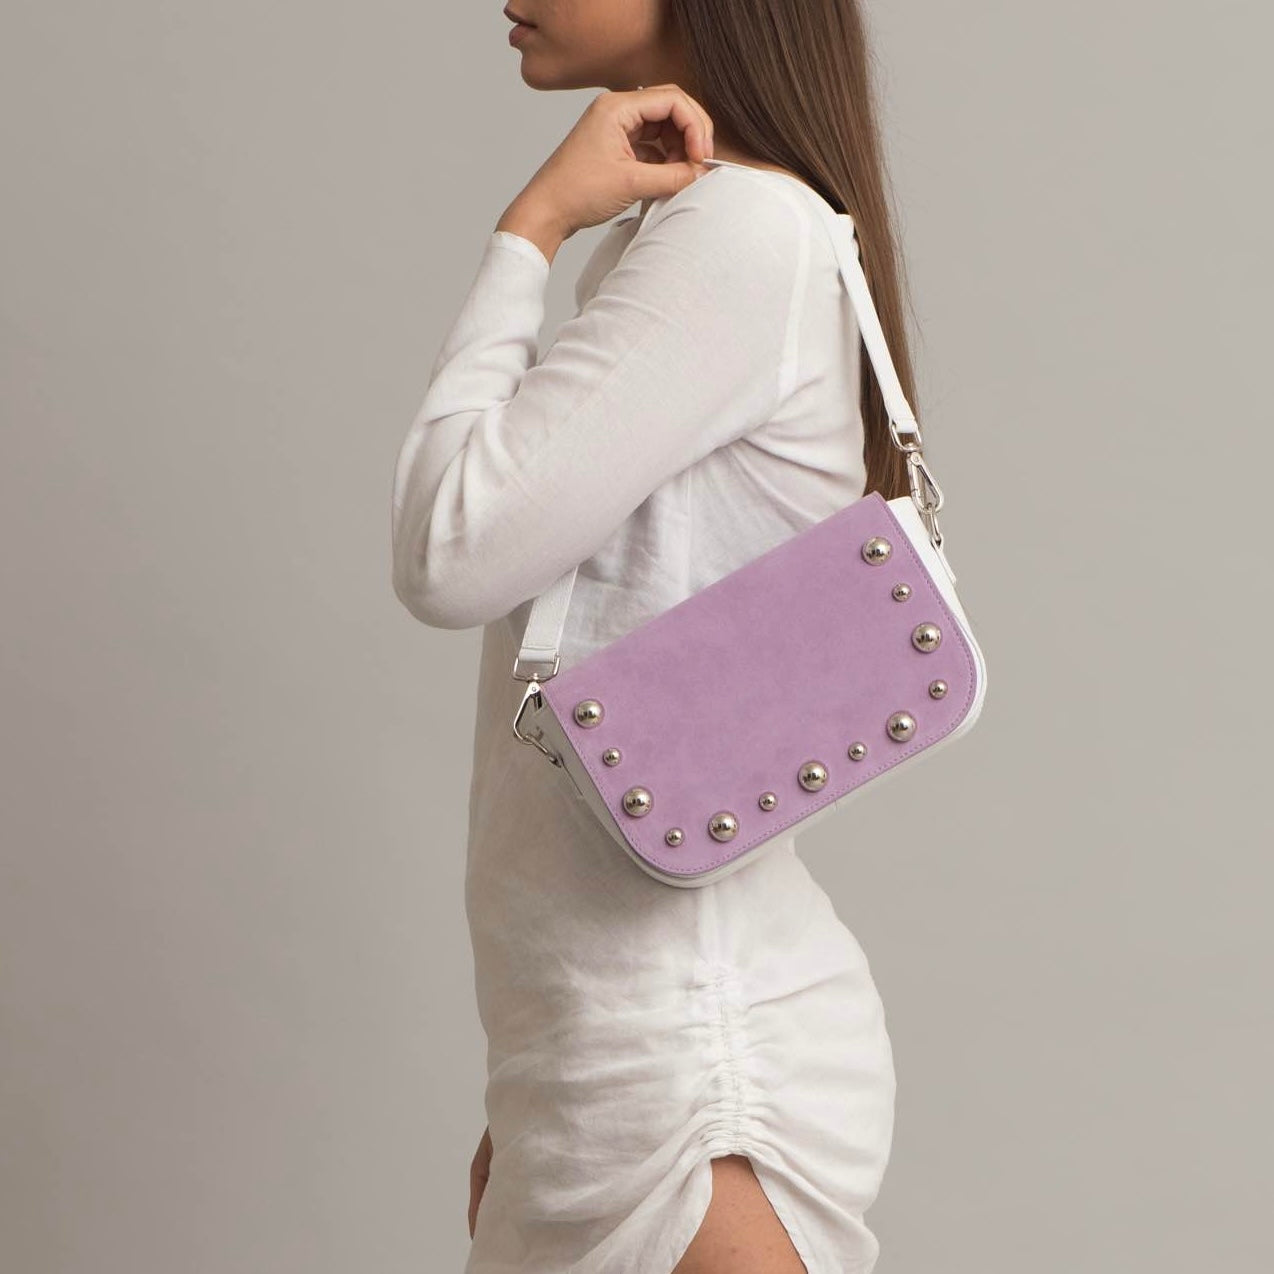 BRONX flap suede leather violet with studs small